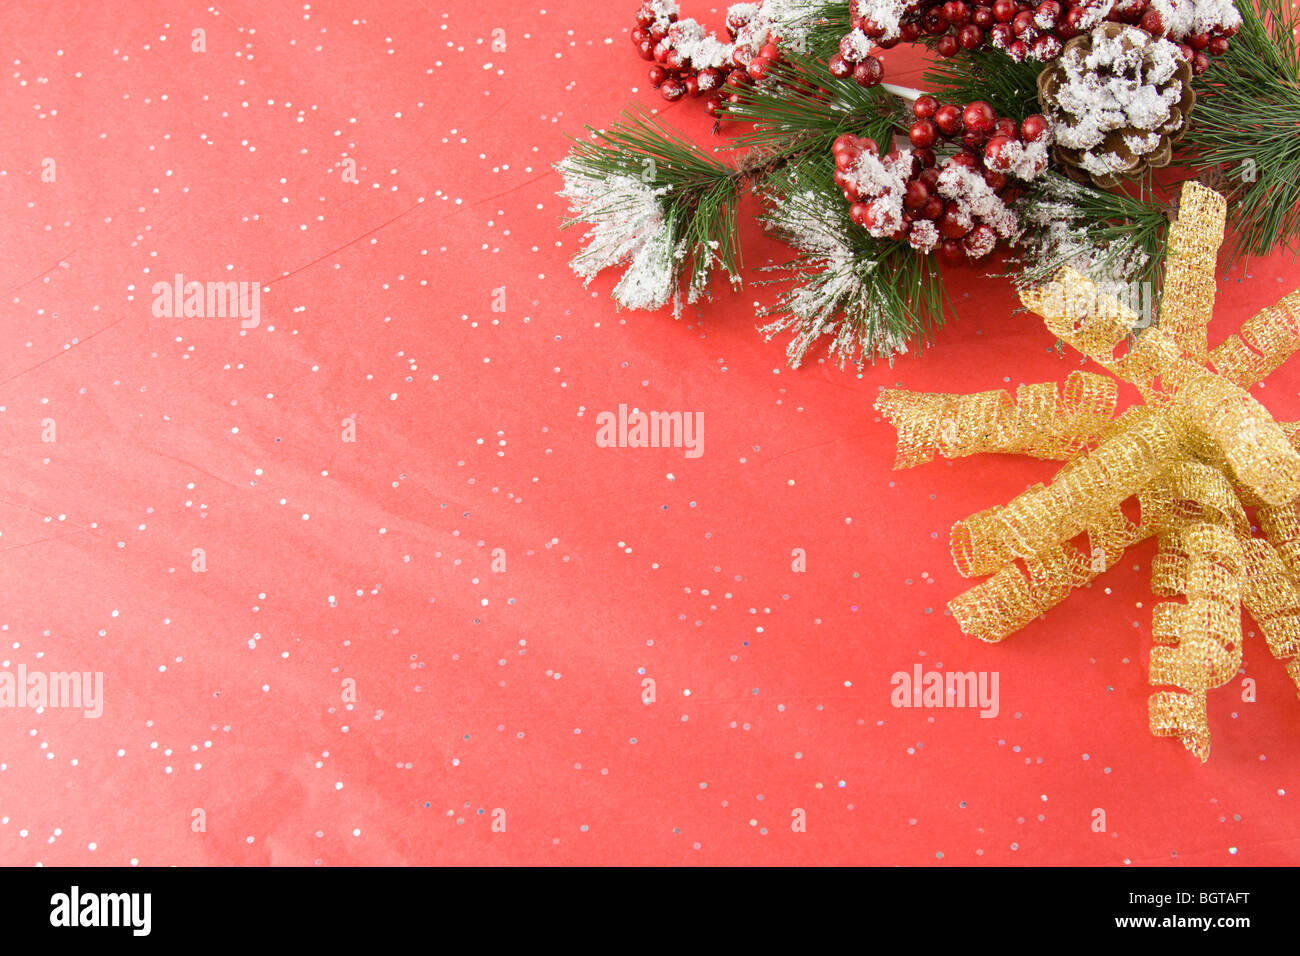 snow covered larch branch with gold foil bow on a textured red background Stock Photo